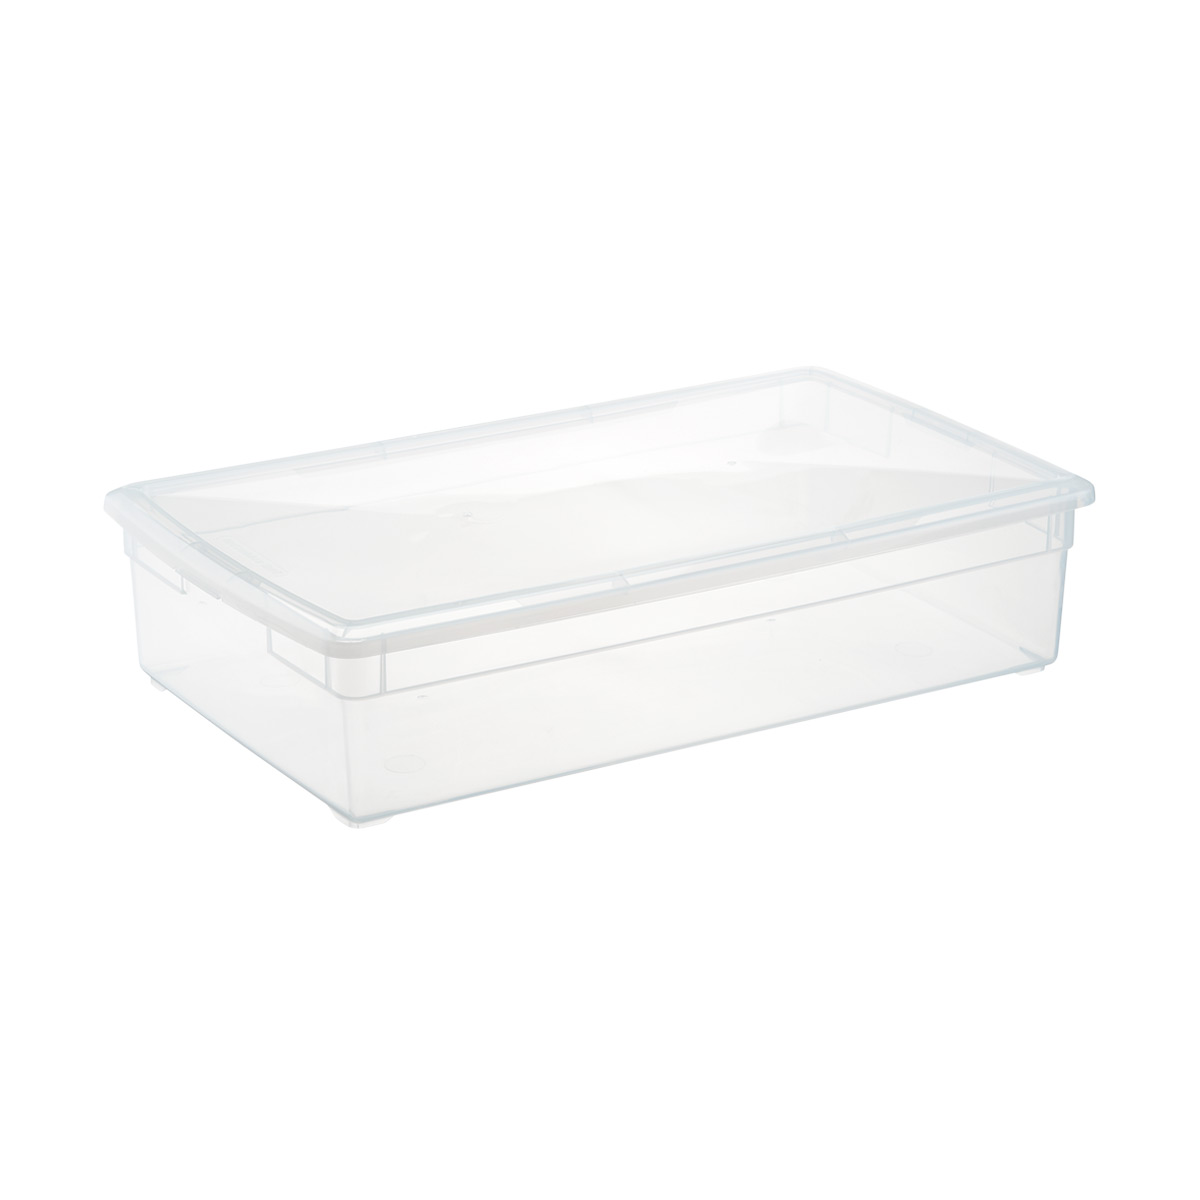 1 Pack Vcansay 20 Litre Lidded Plastic Clear Storage Bin with Black Handles 